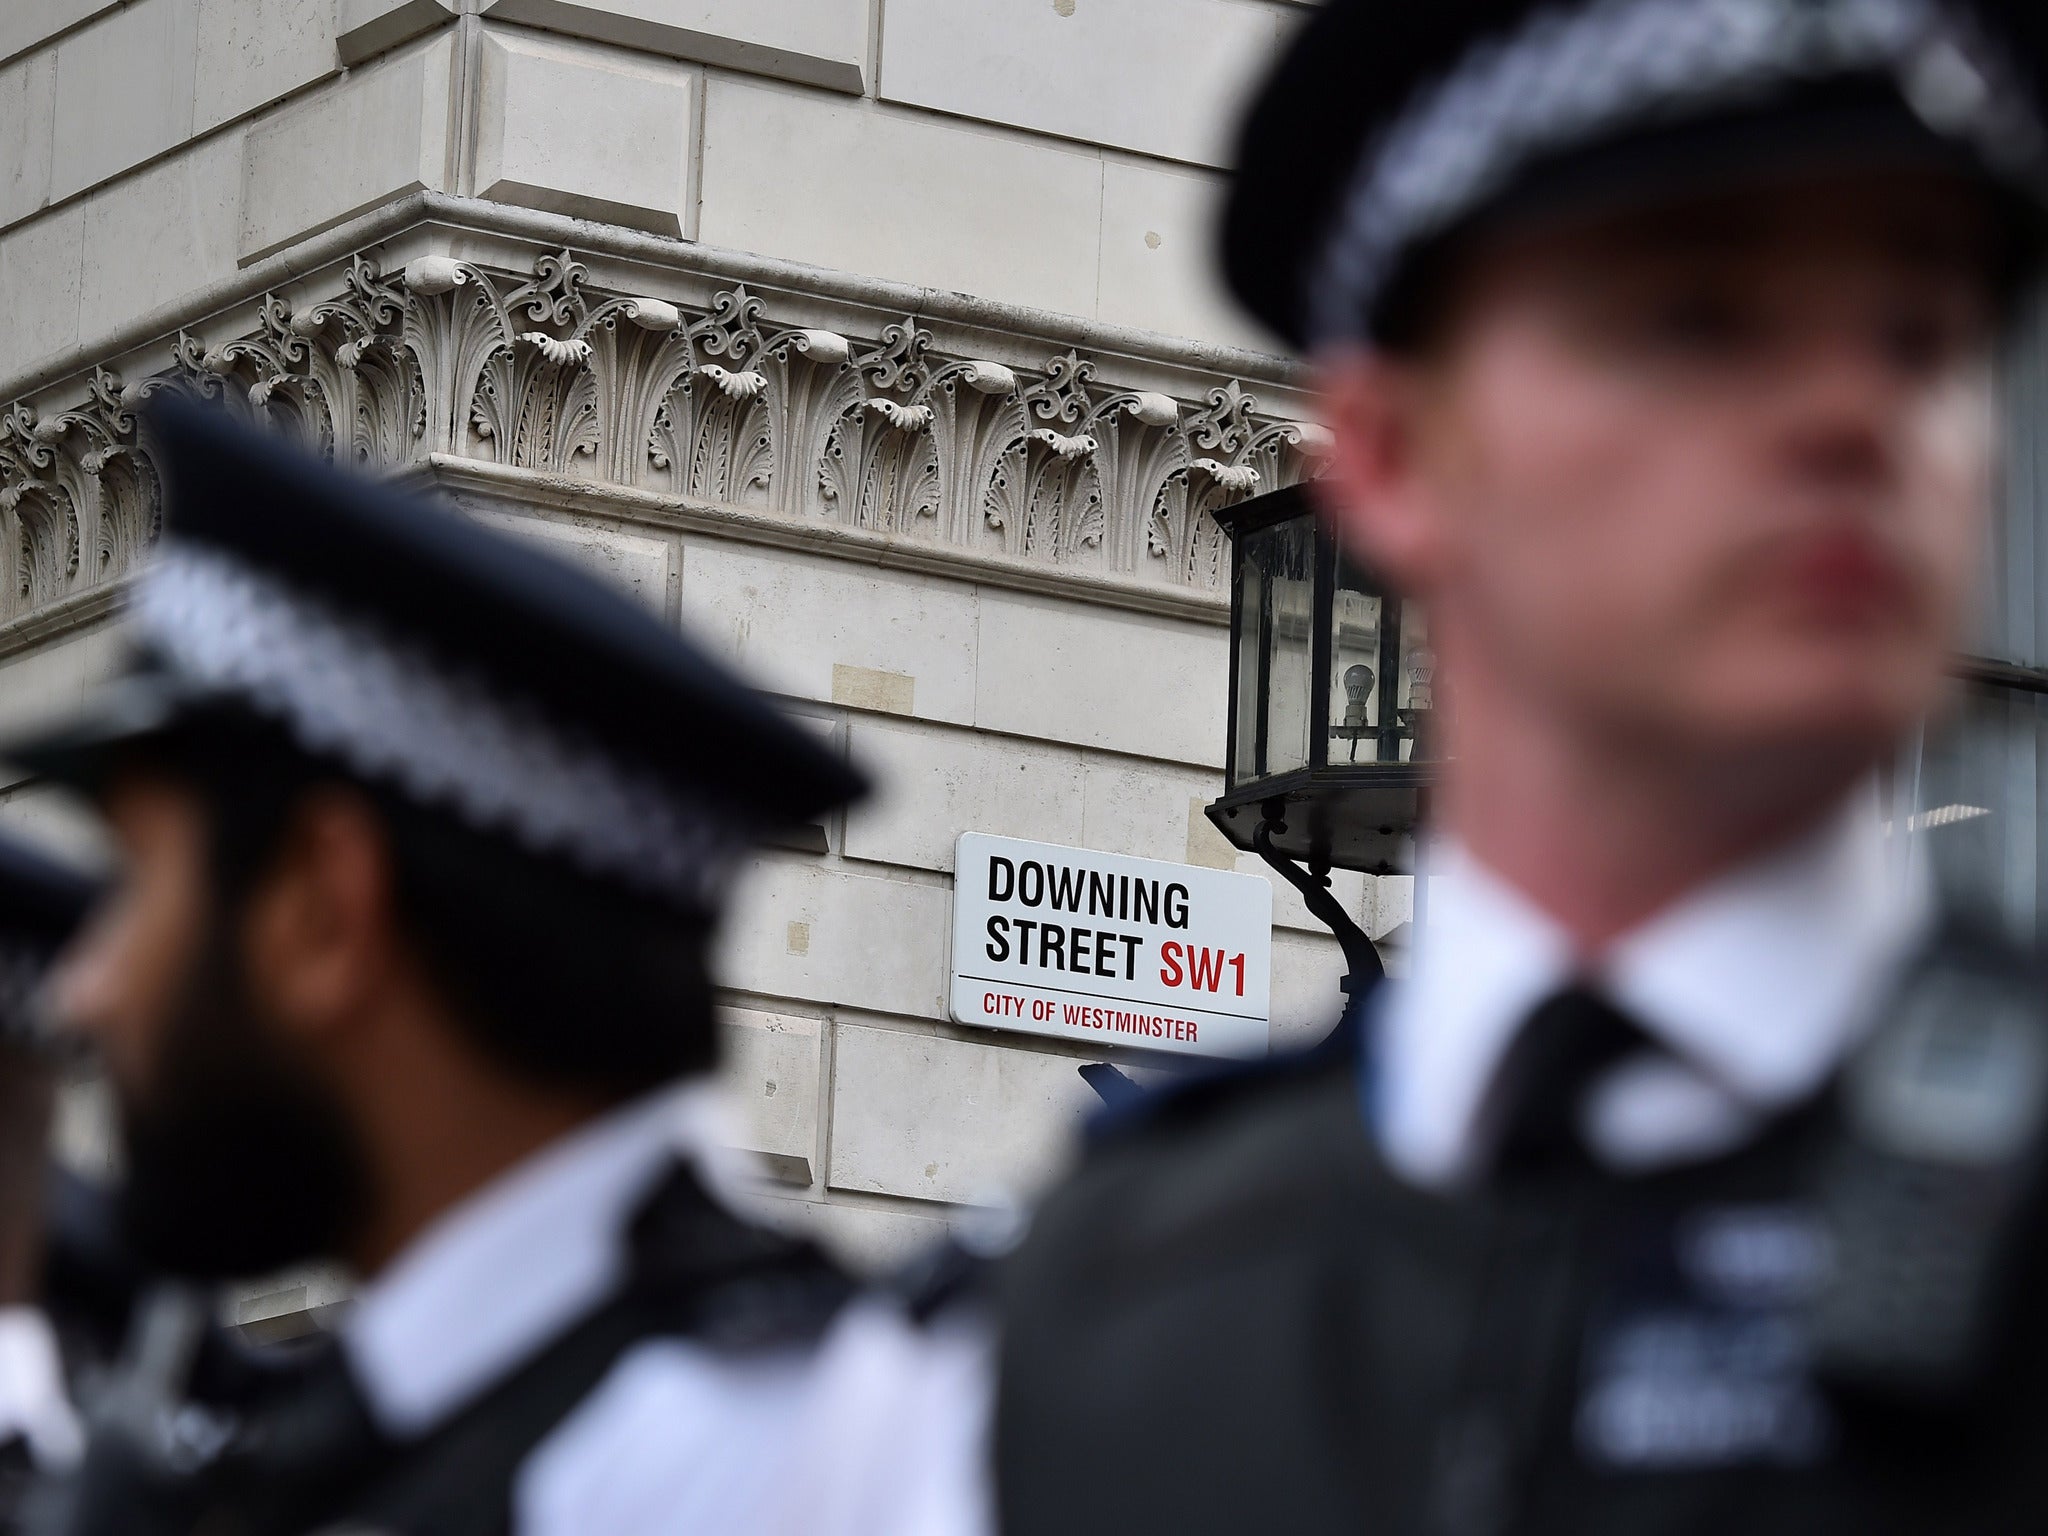 Downing Street hasn't always been cut off by security